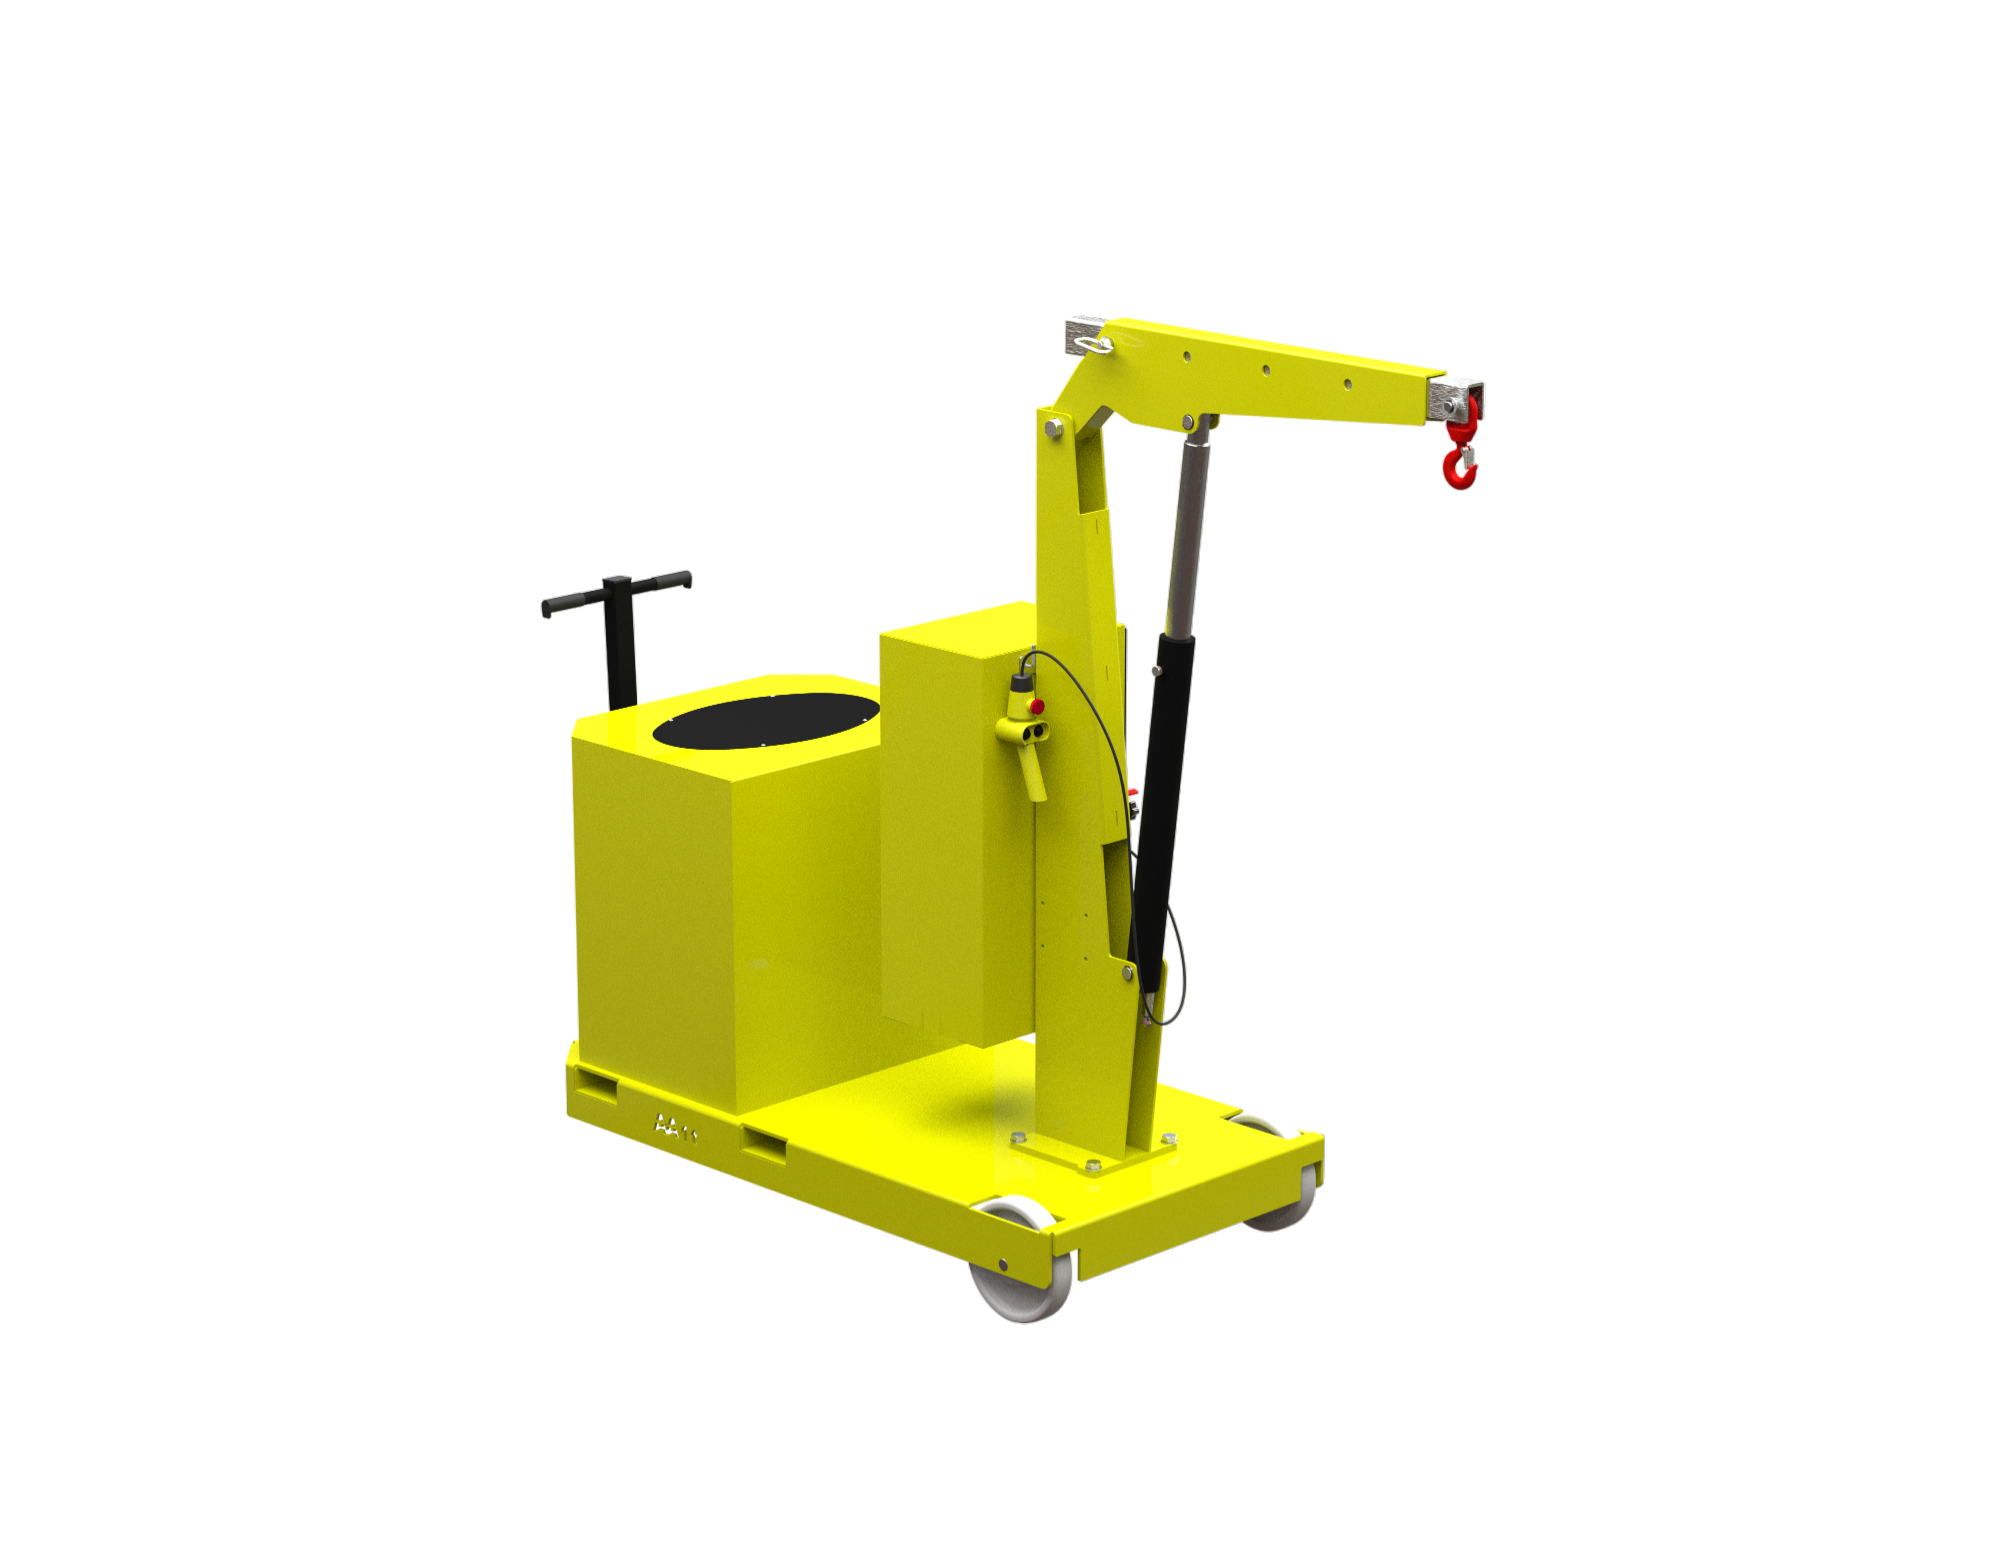 GZ1000B mobile lifting system with wire control for loads up to 1,000 kg